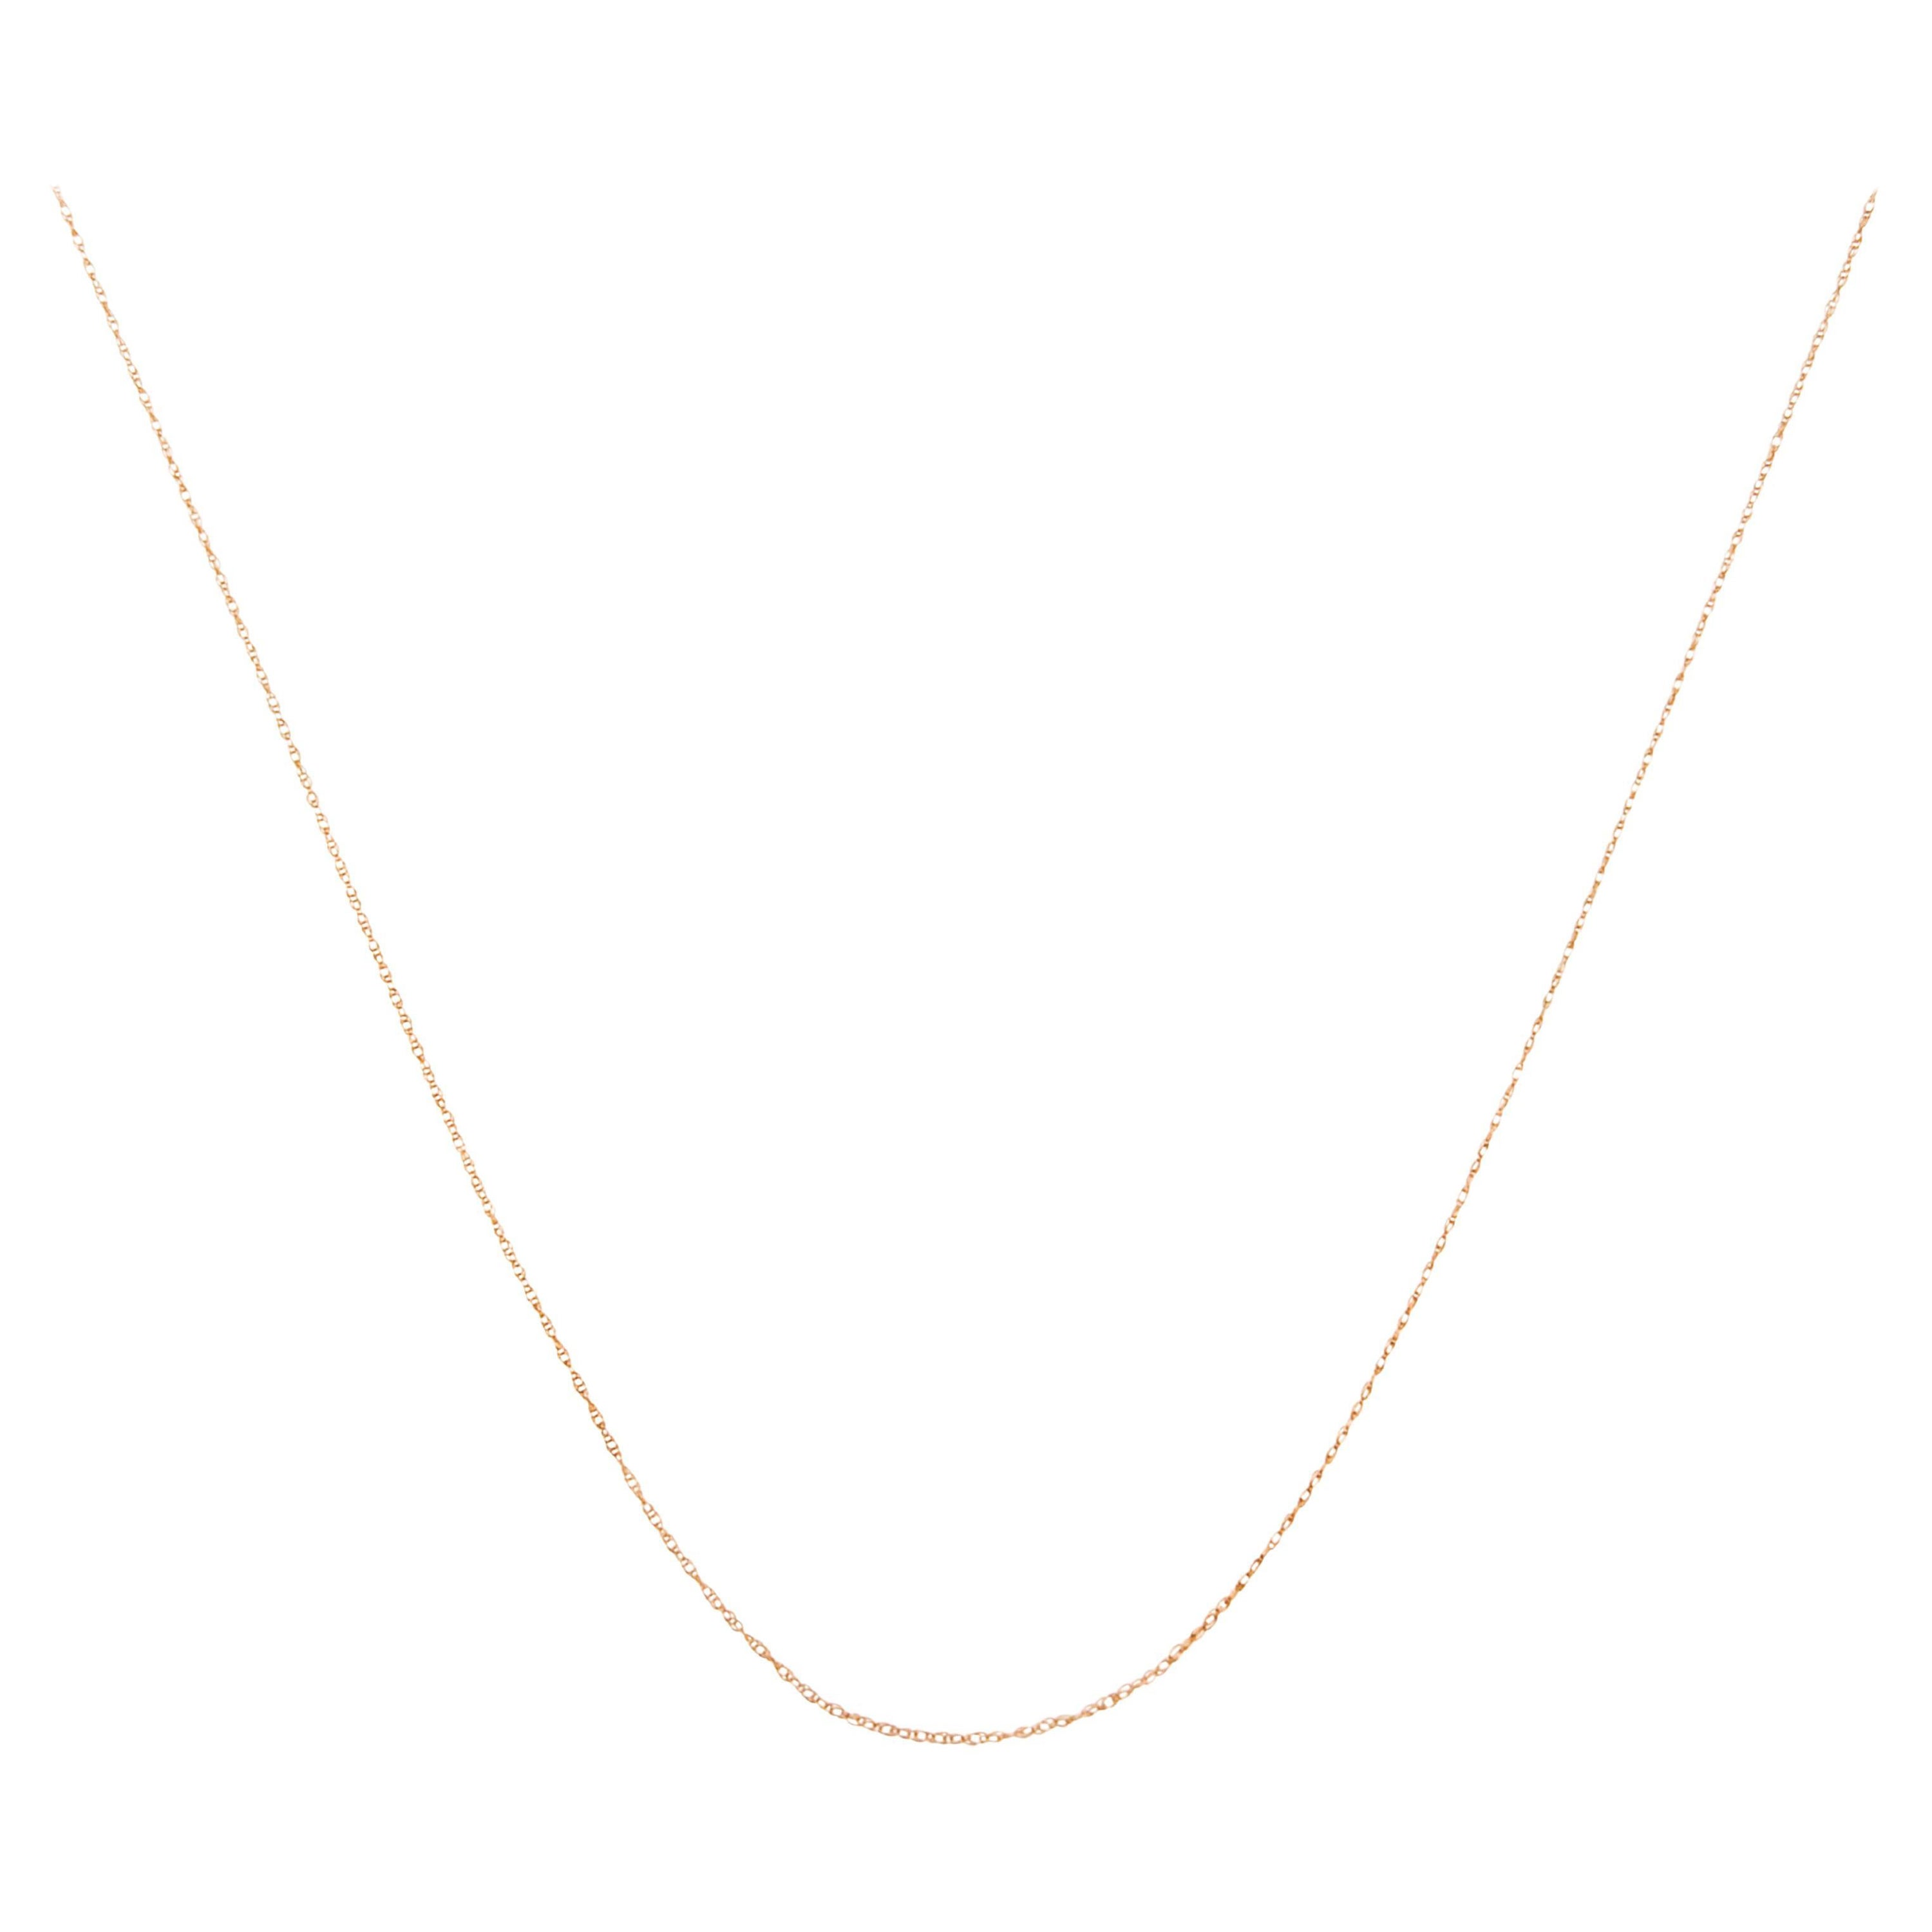 Solid 10K Rose Gold Rope Chain Necklace Unisex Chain For Sale